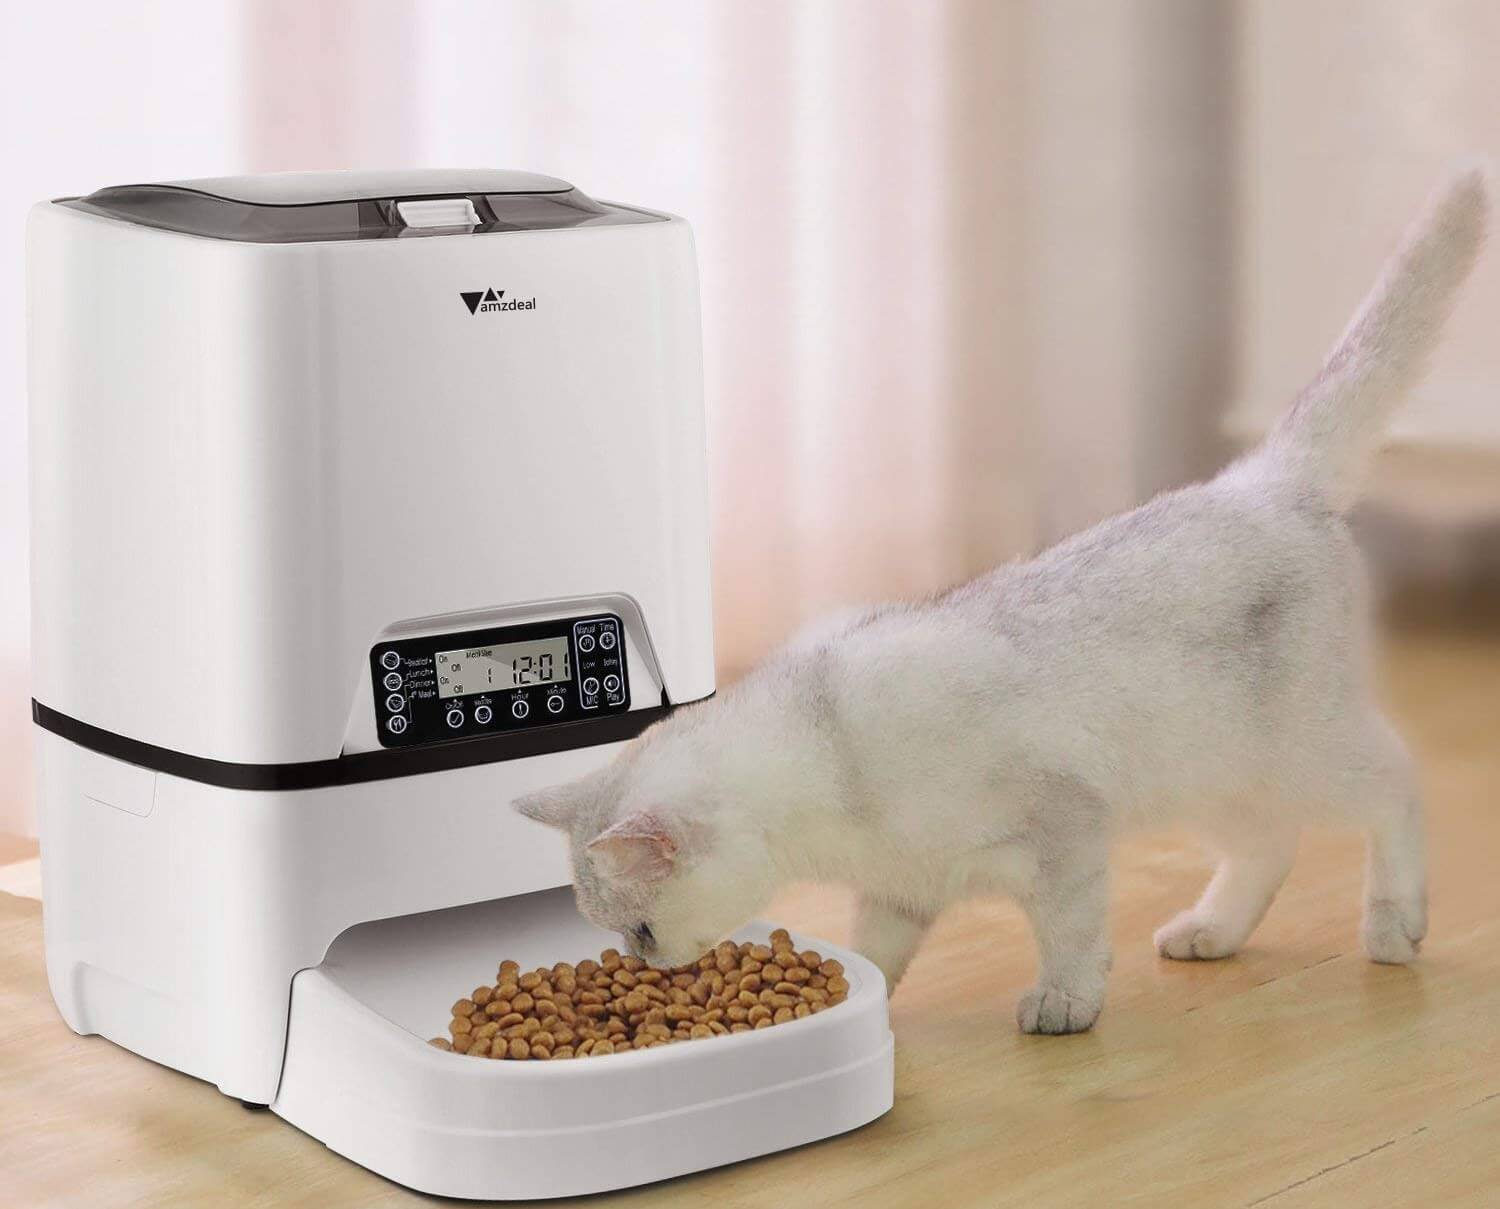  Automatic Cat Feeders